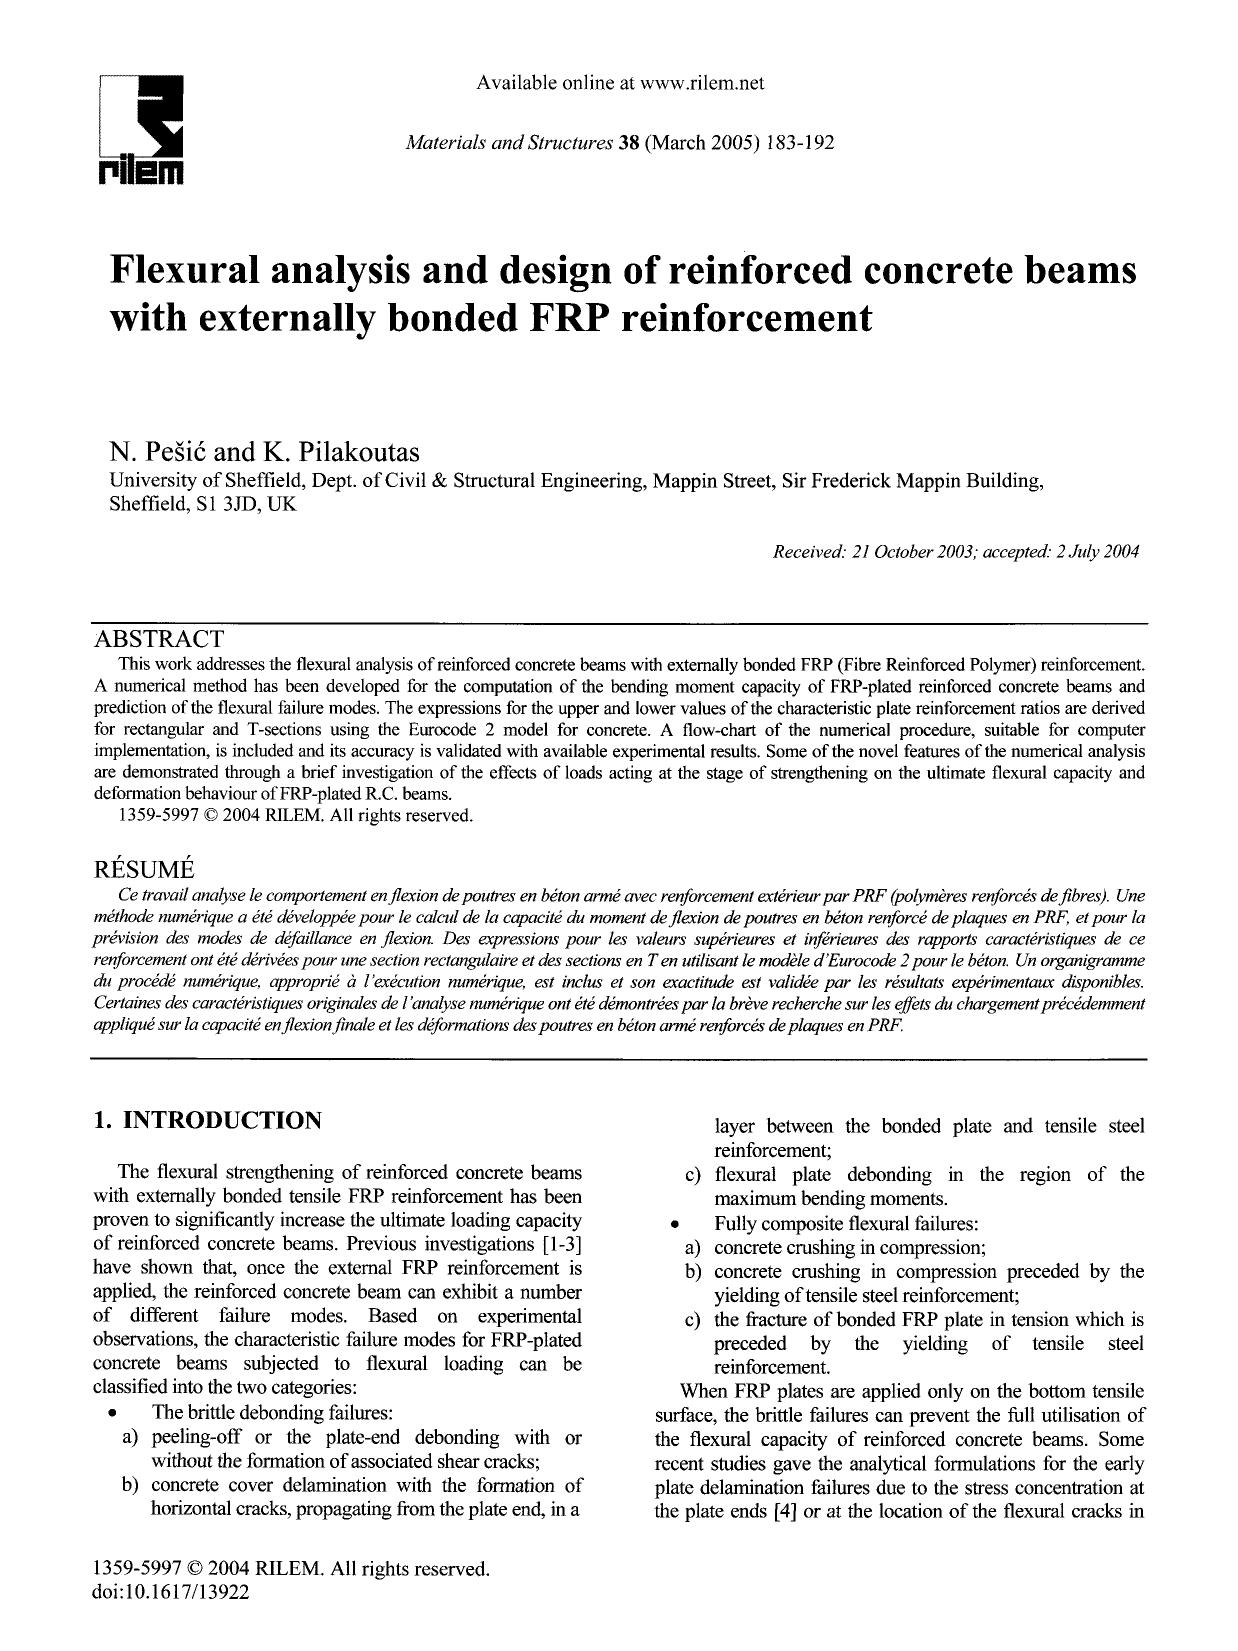 Flexural analysis and design of reinforced concrete beams with externally bonded FRP reinforcement by Unknown